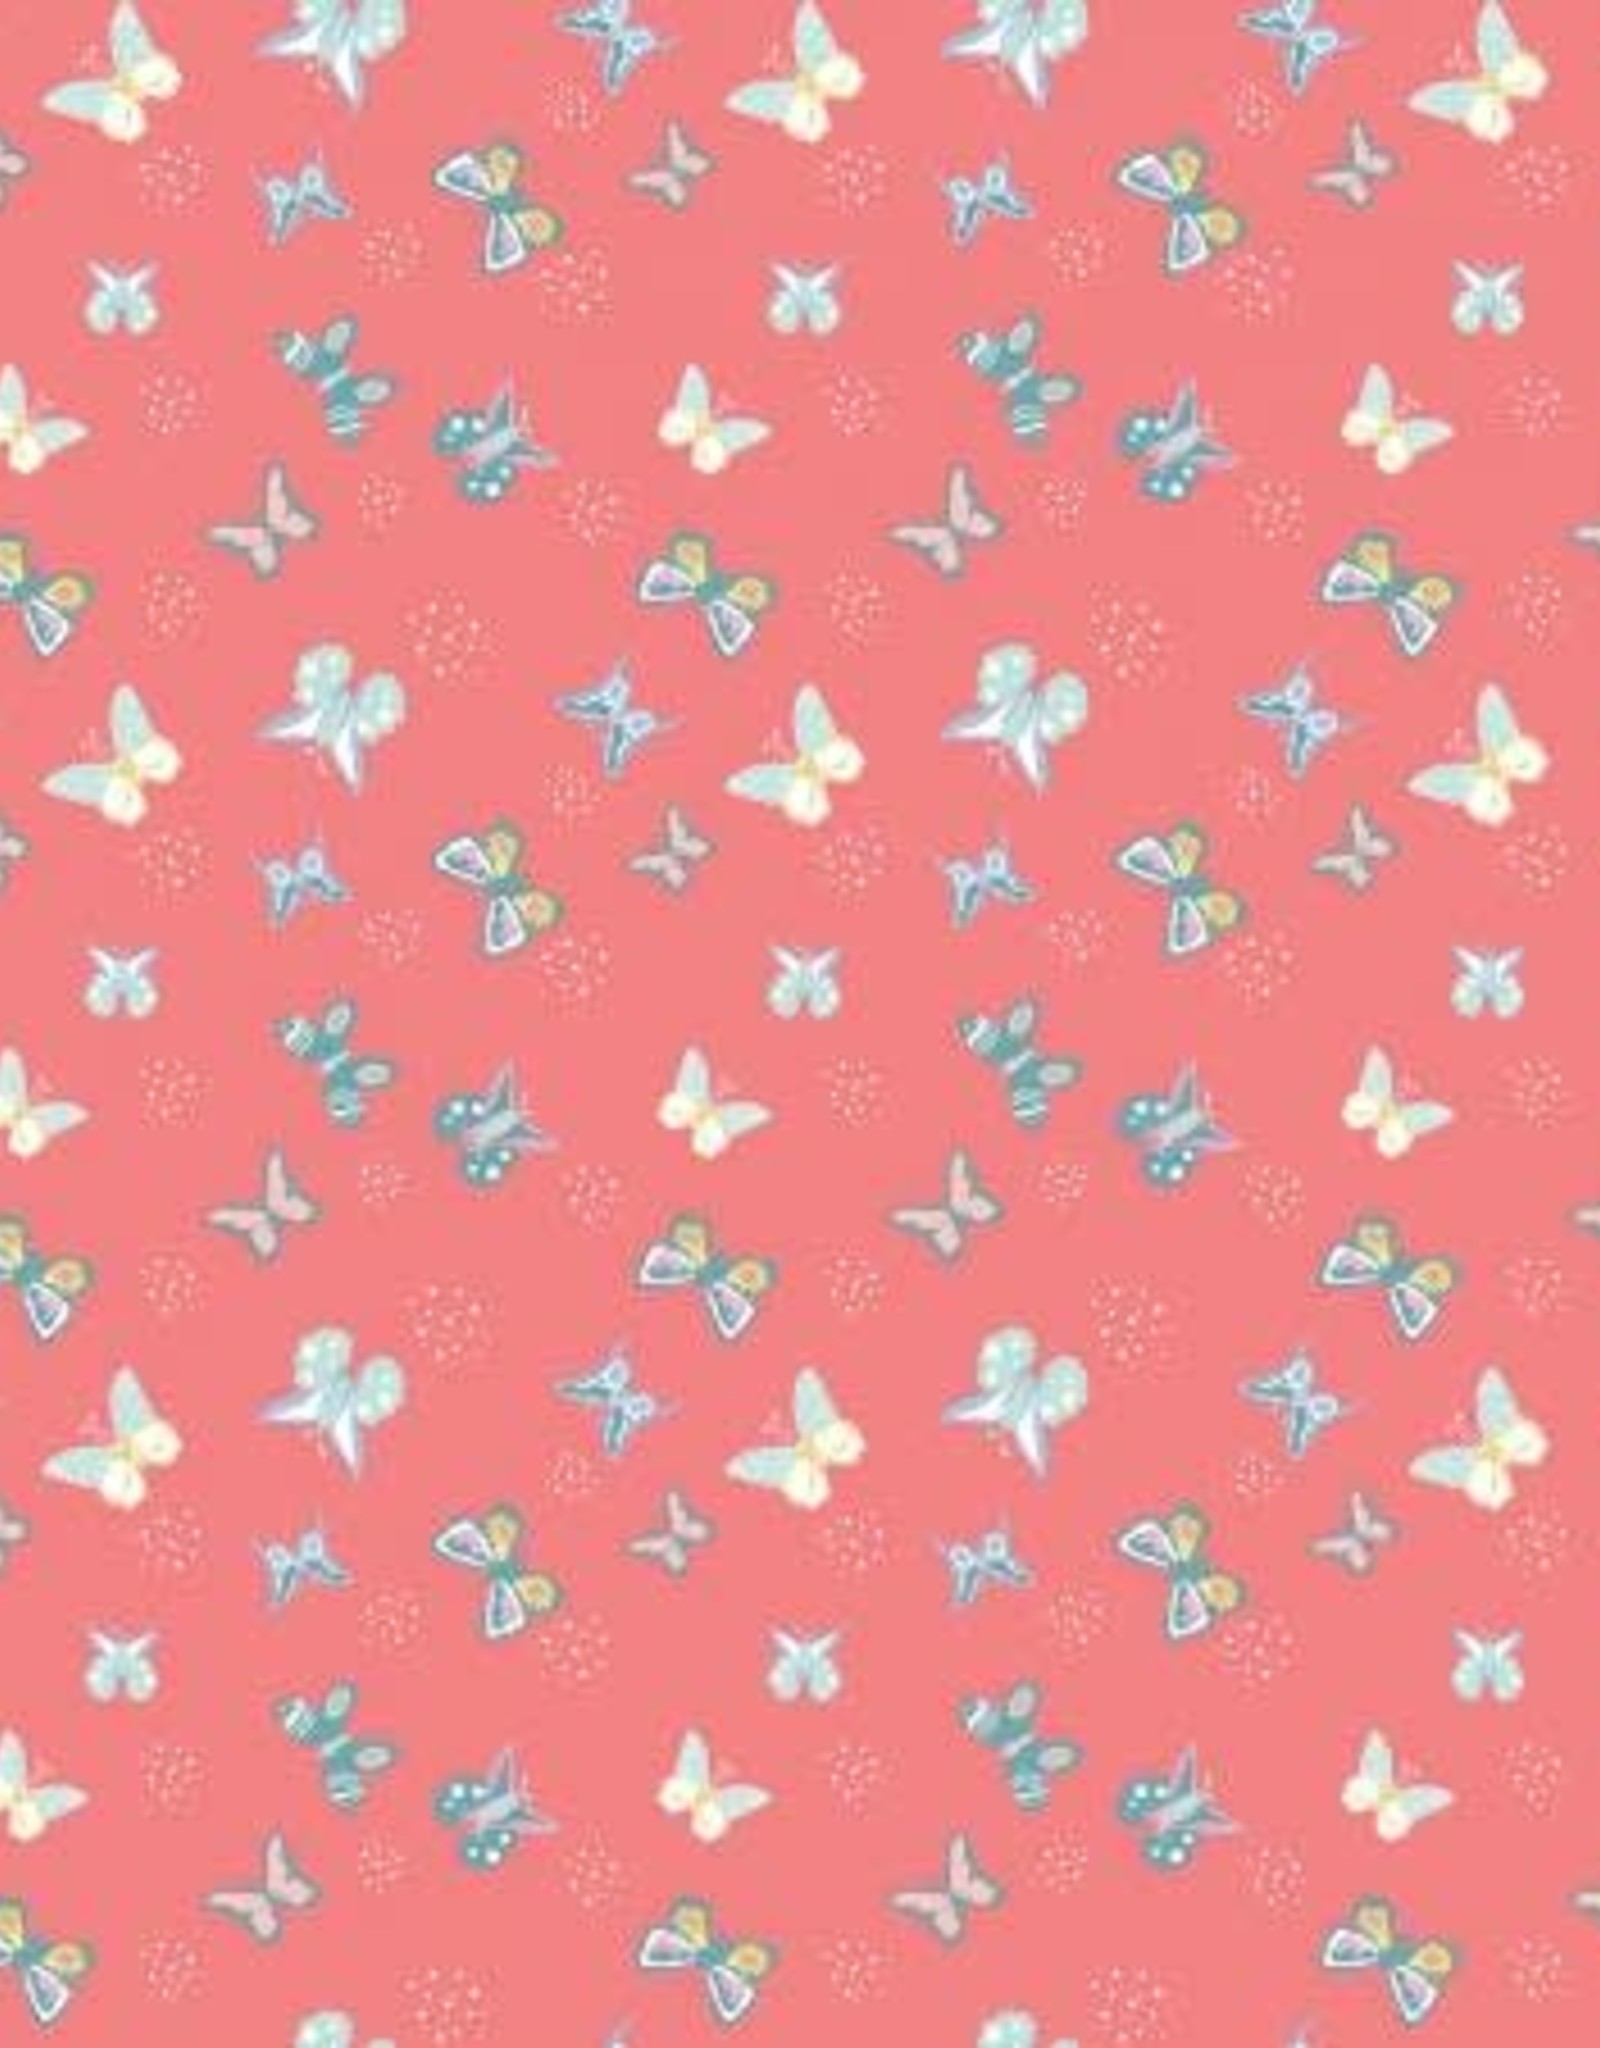 Poppy and Posey Butterflies Coral 1/2m C10586R-CORAL